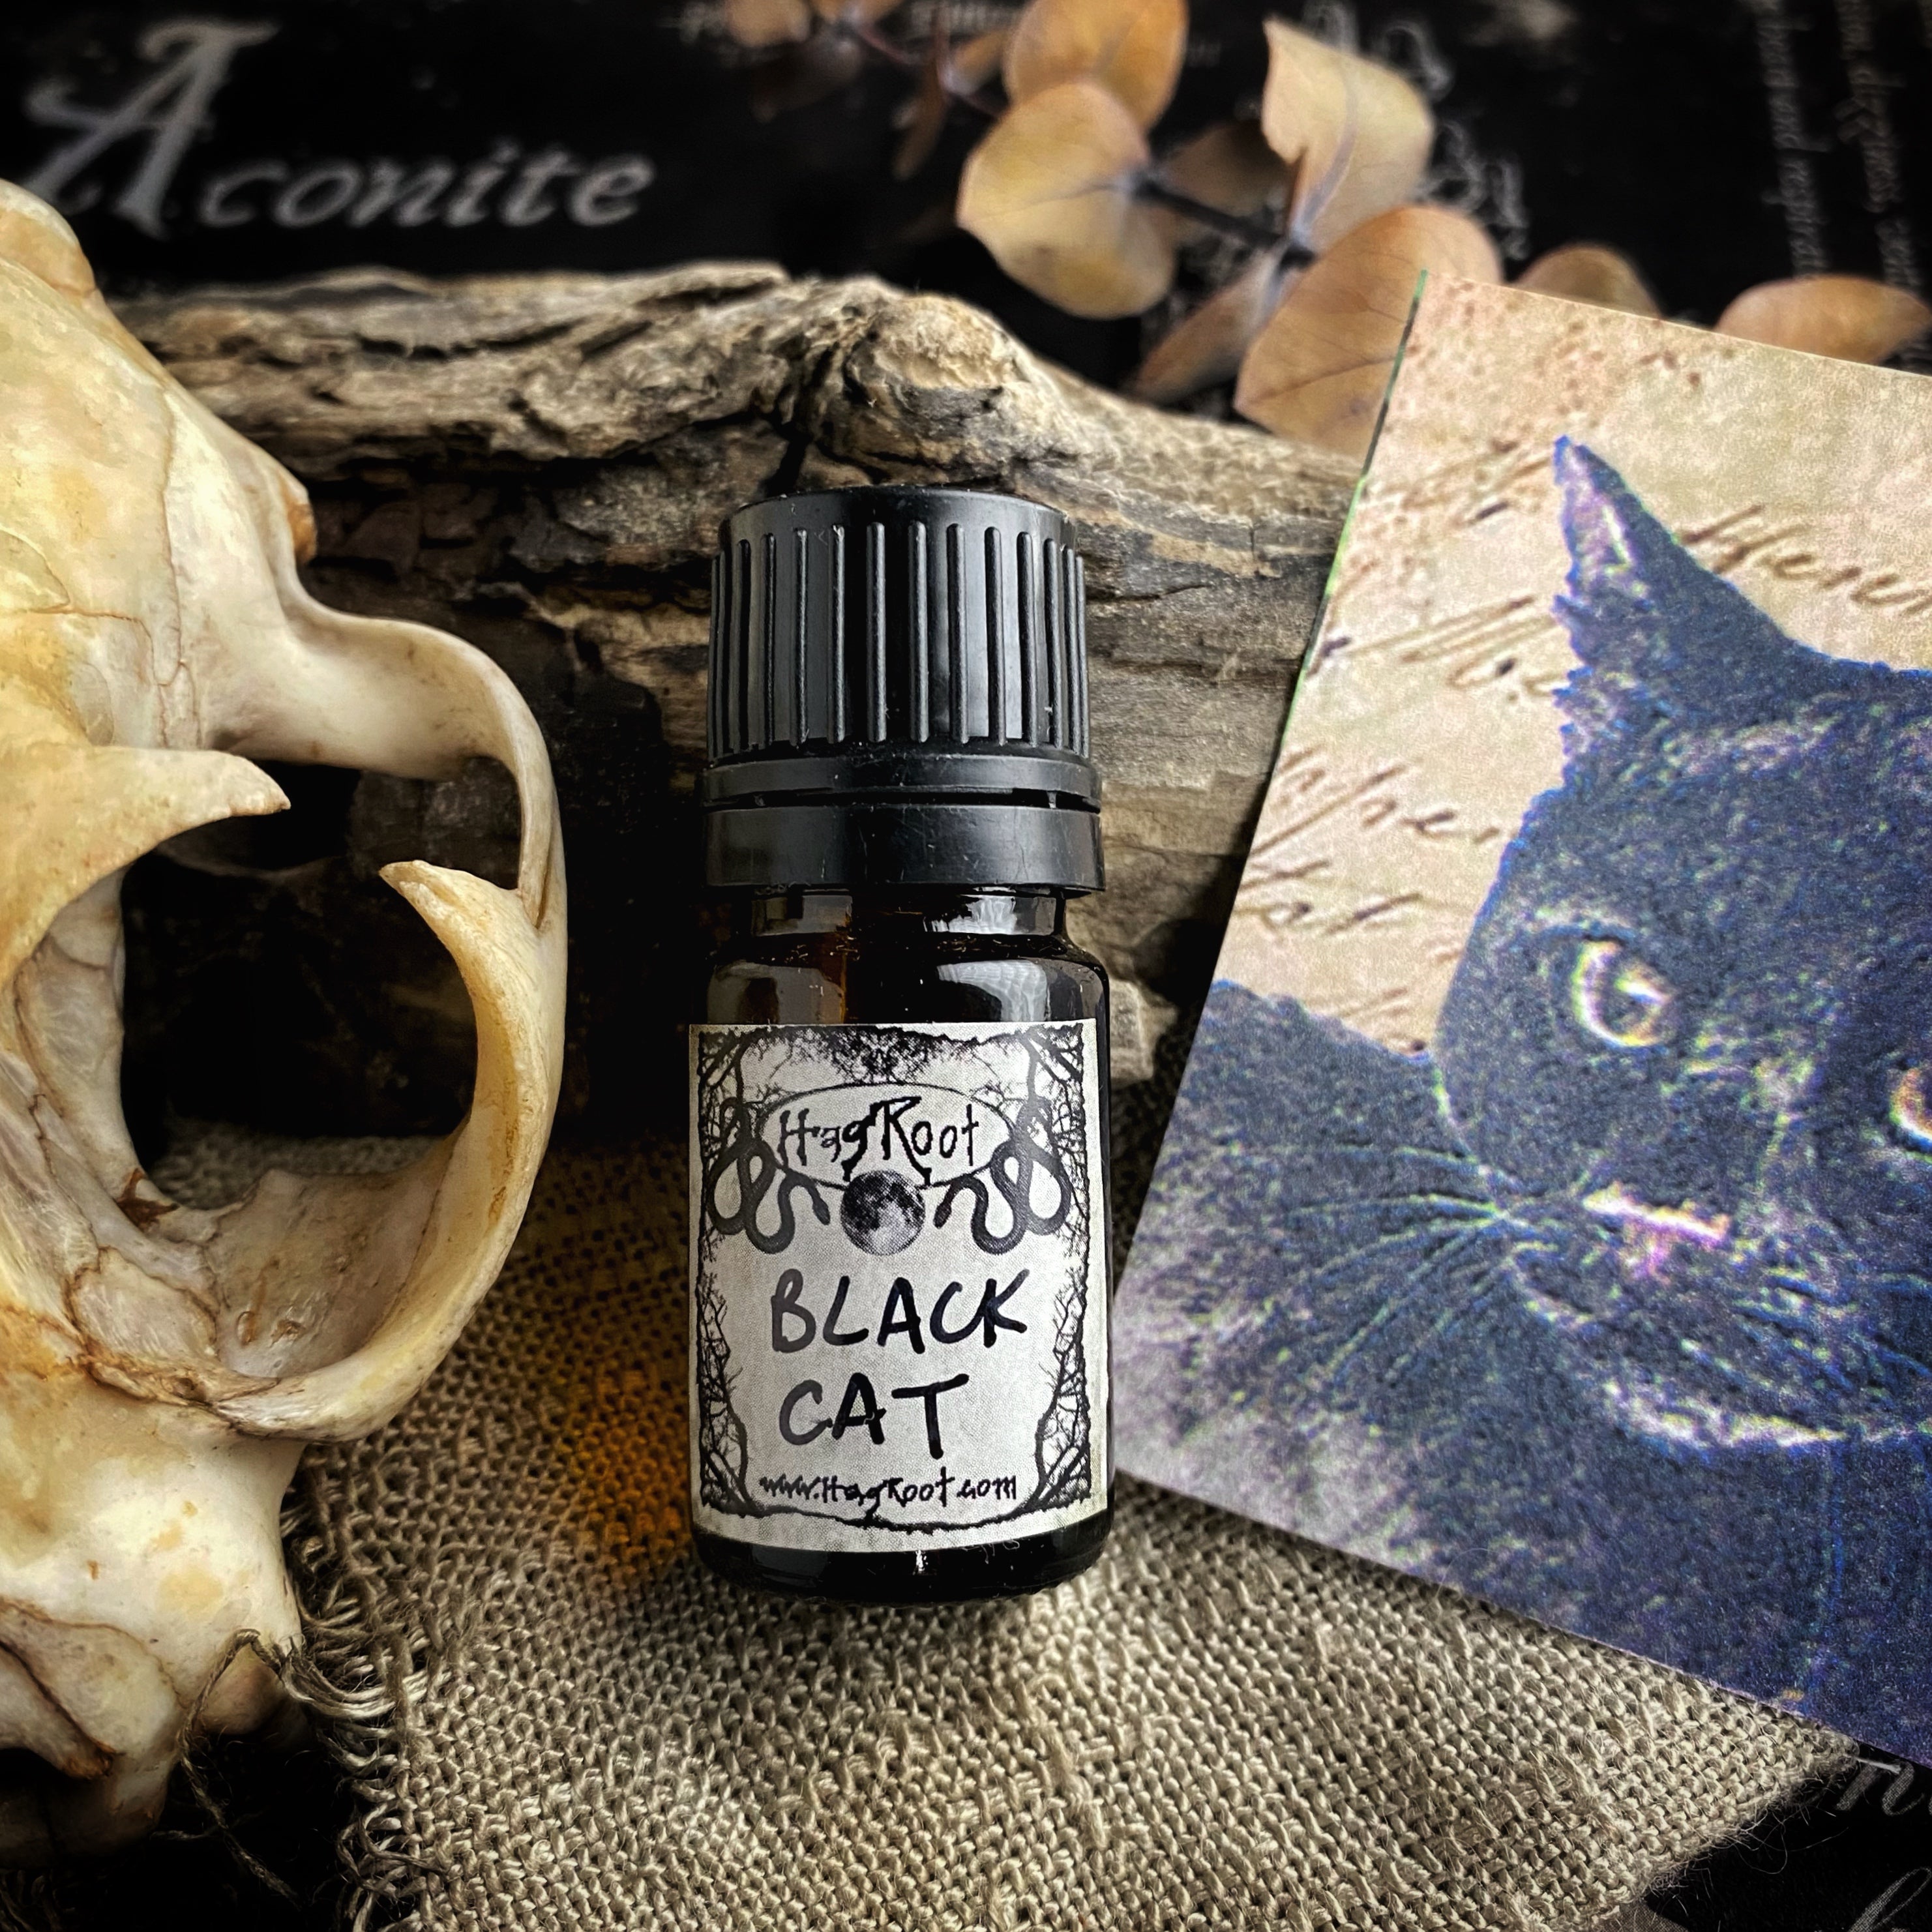 BLACK CAT-(Black Leather, Black Tea Leaves, Dark Patchouli, Smoked Woods)-2021 Edition-Perfume, Cologne, Anointing, Ritual Oil